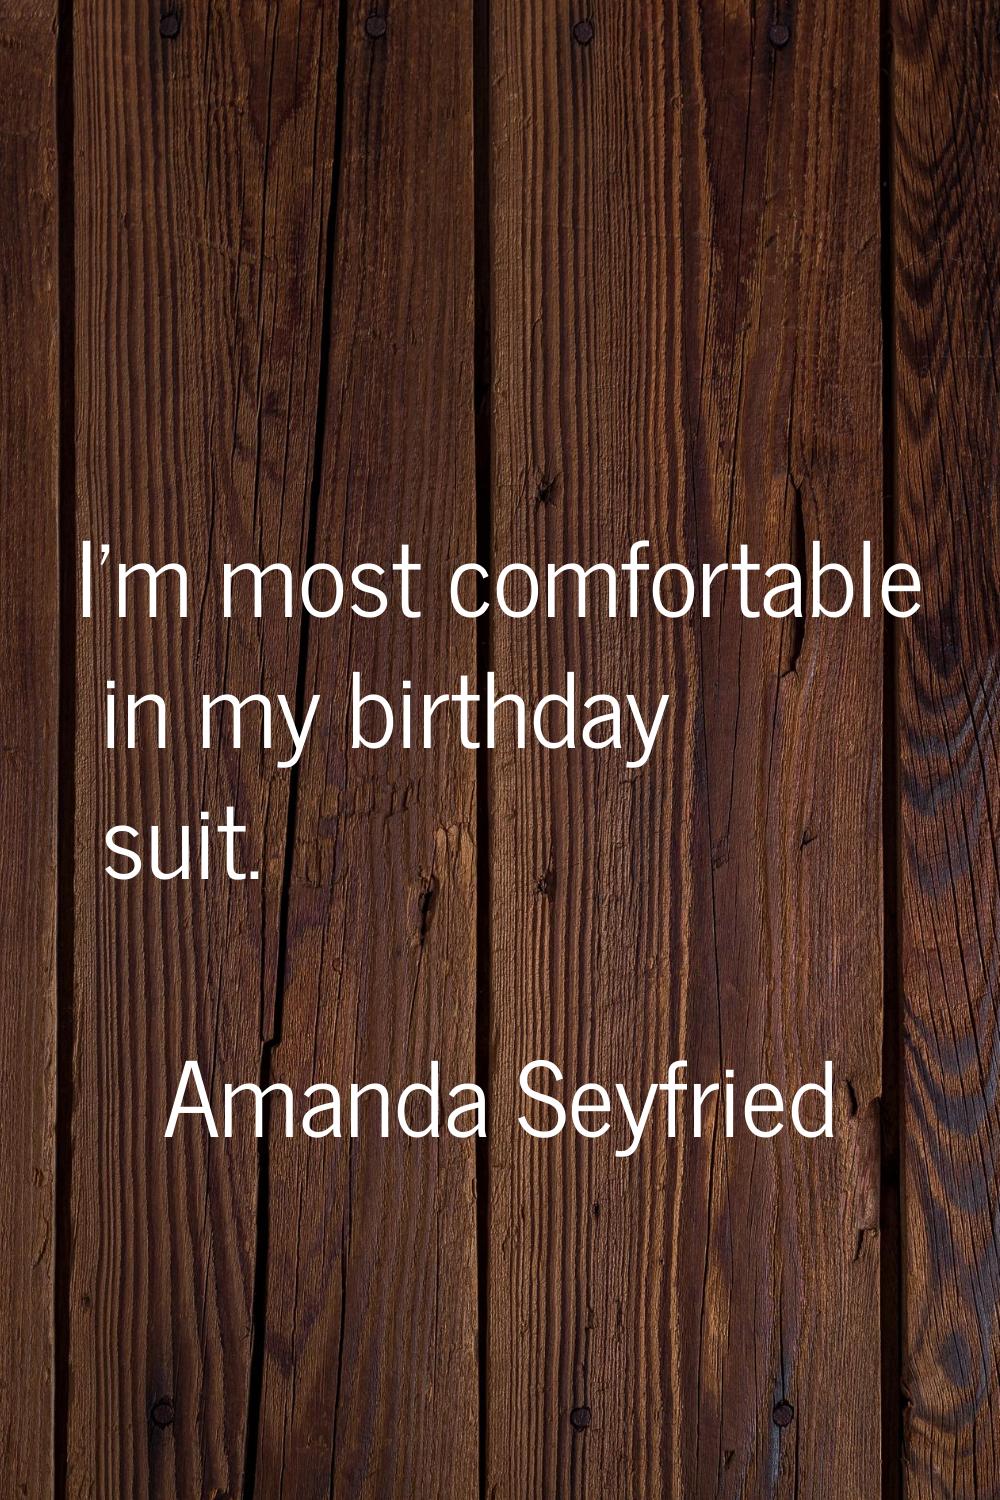 I'm most comfortable in my birthday suit.